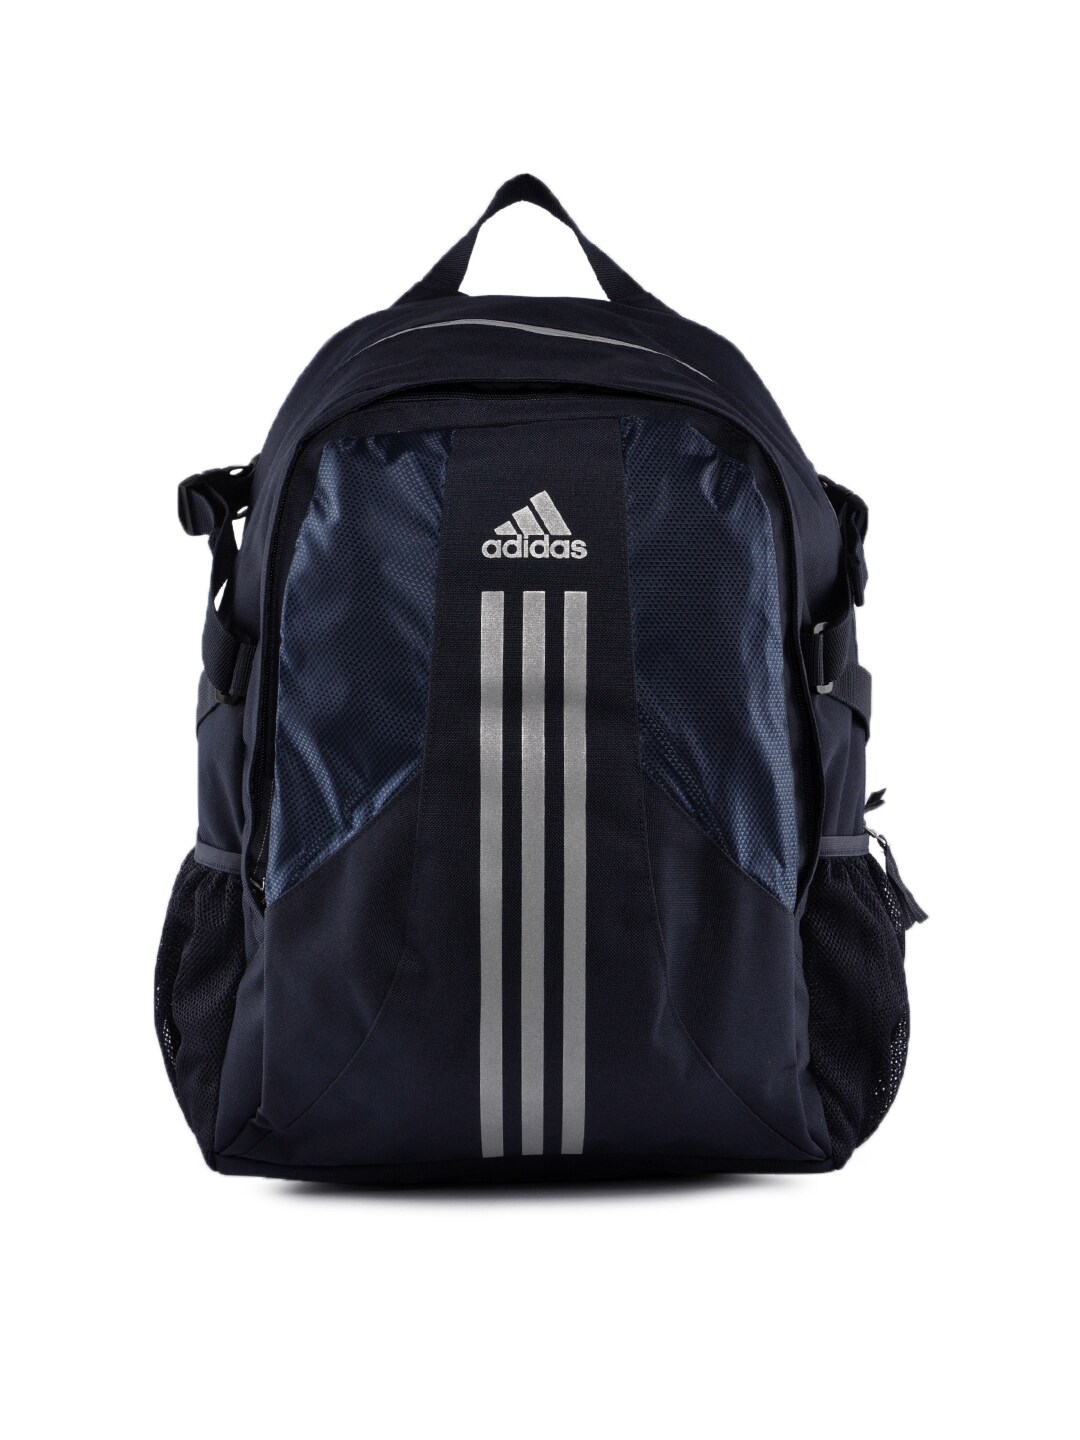 ADIDAS Unisex Navy Blue Casual Backpack